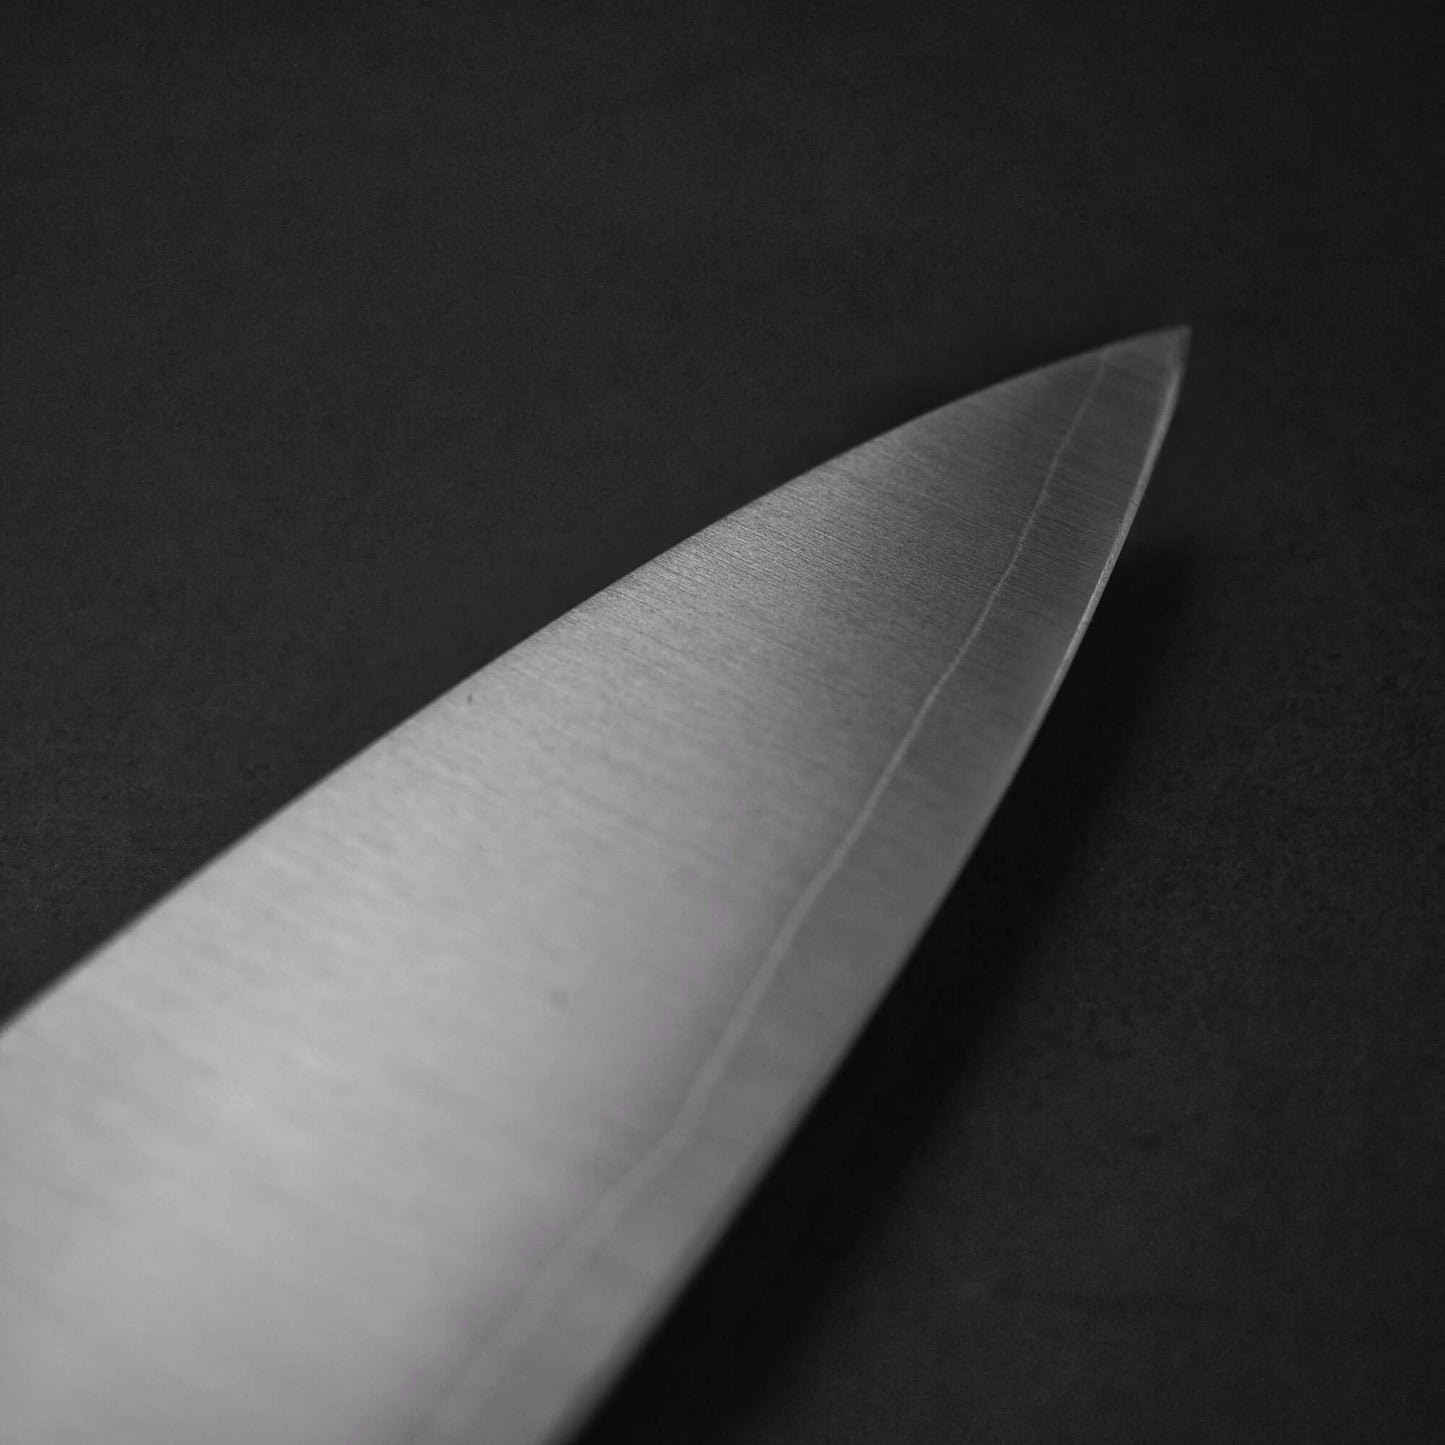 Close up view of Sukenari HAP40 240mm gyuto. Image focuses on the tip area of the right side of the blade